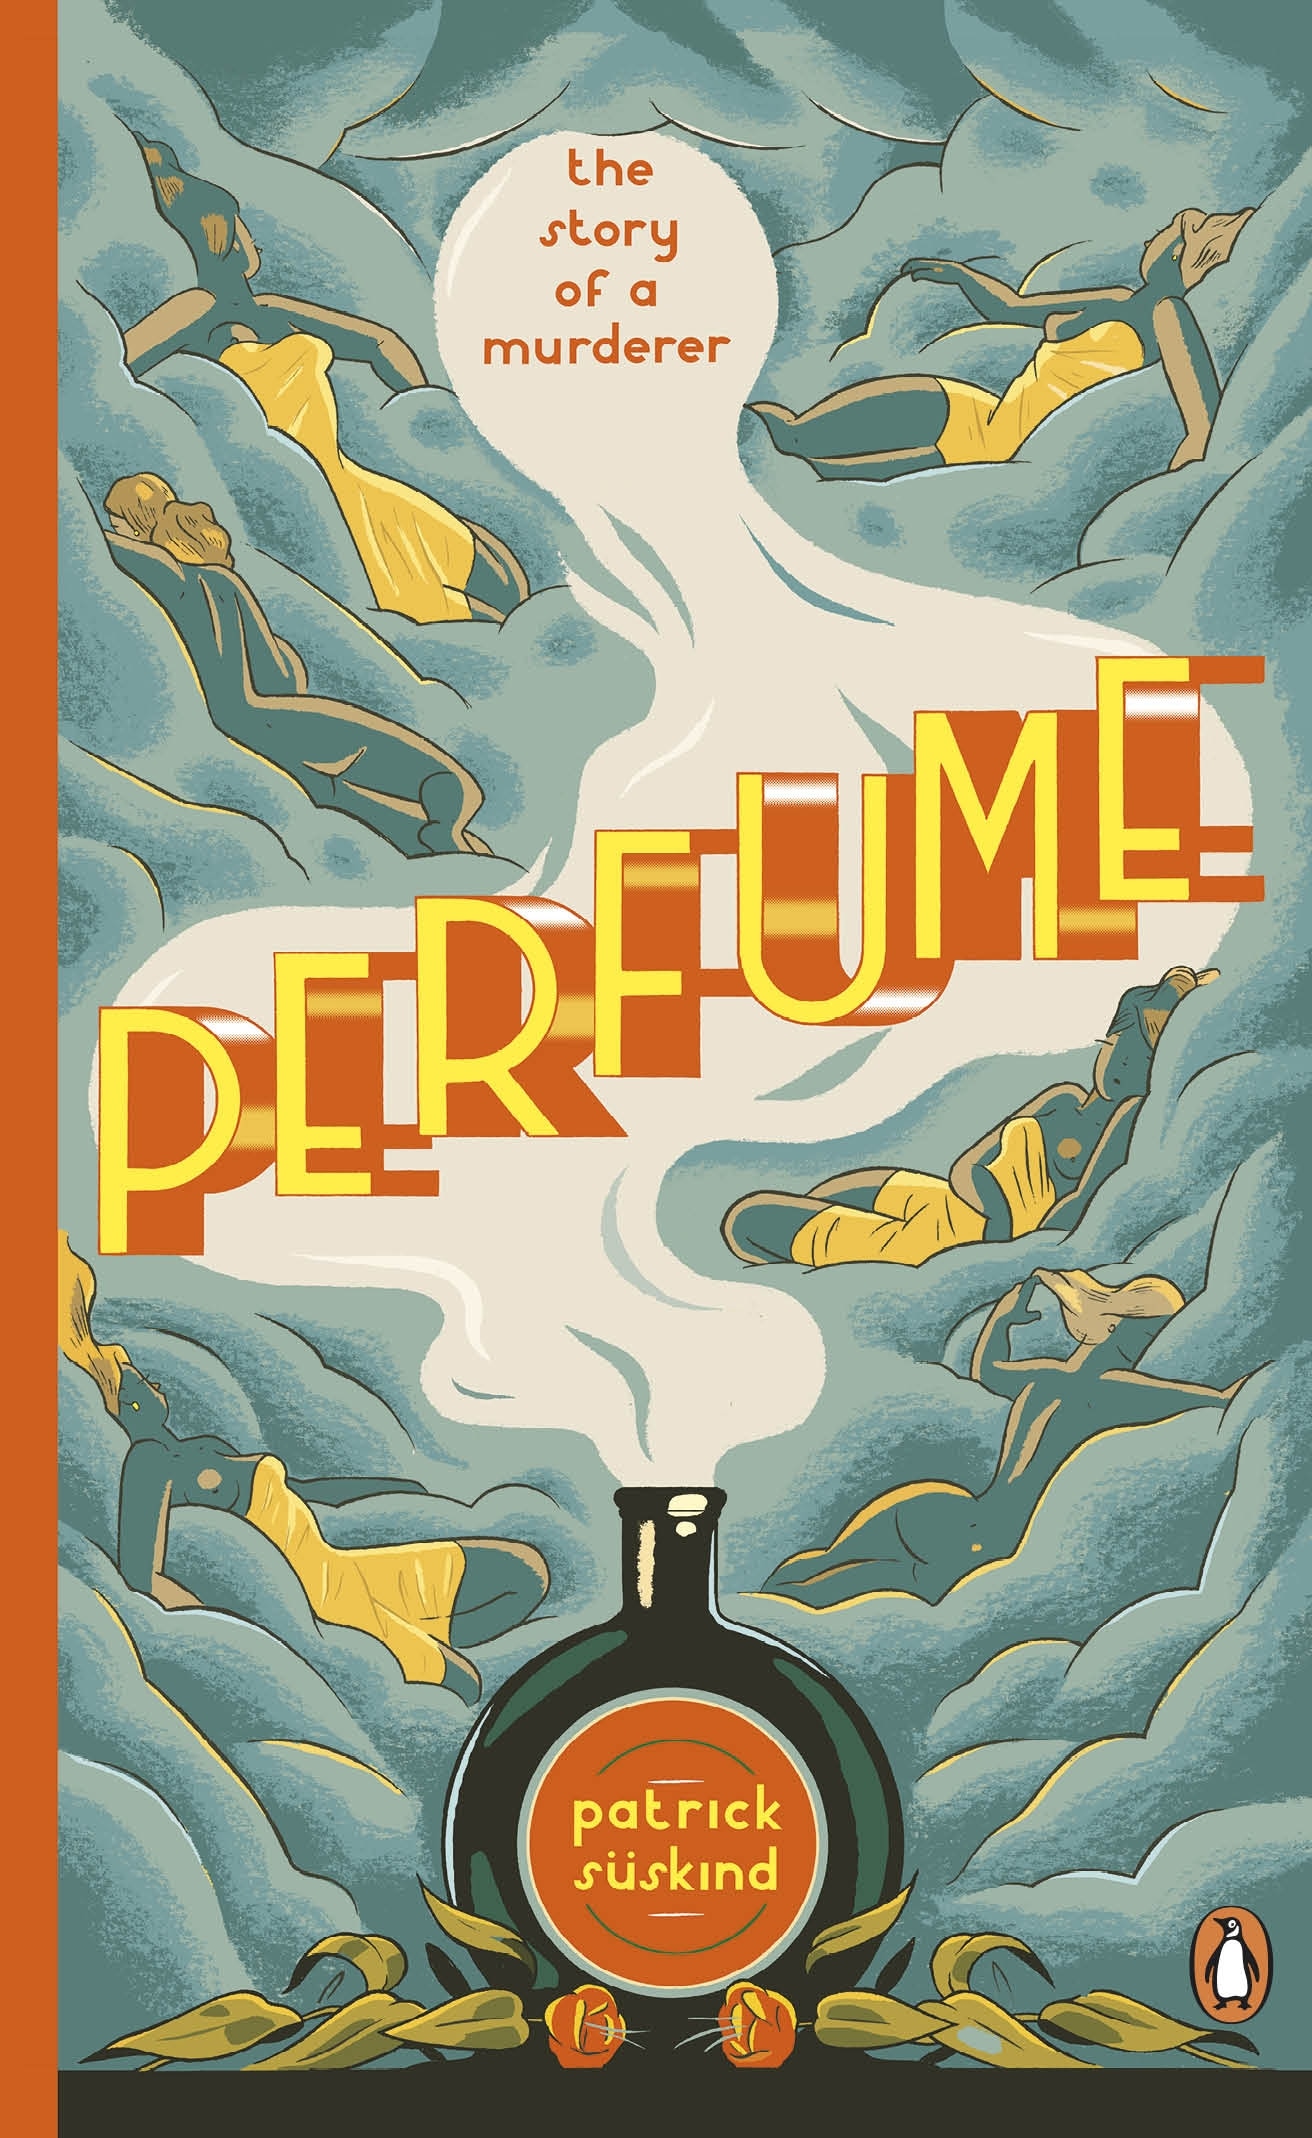 Book “Perfume” by Patrick Süskind — August 6, 2015